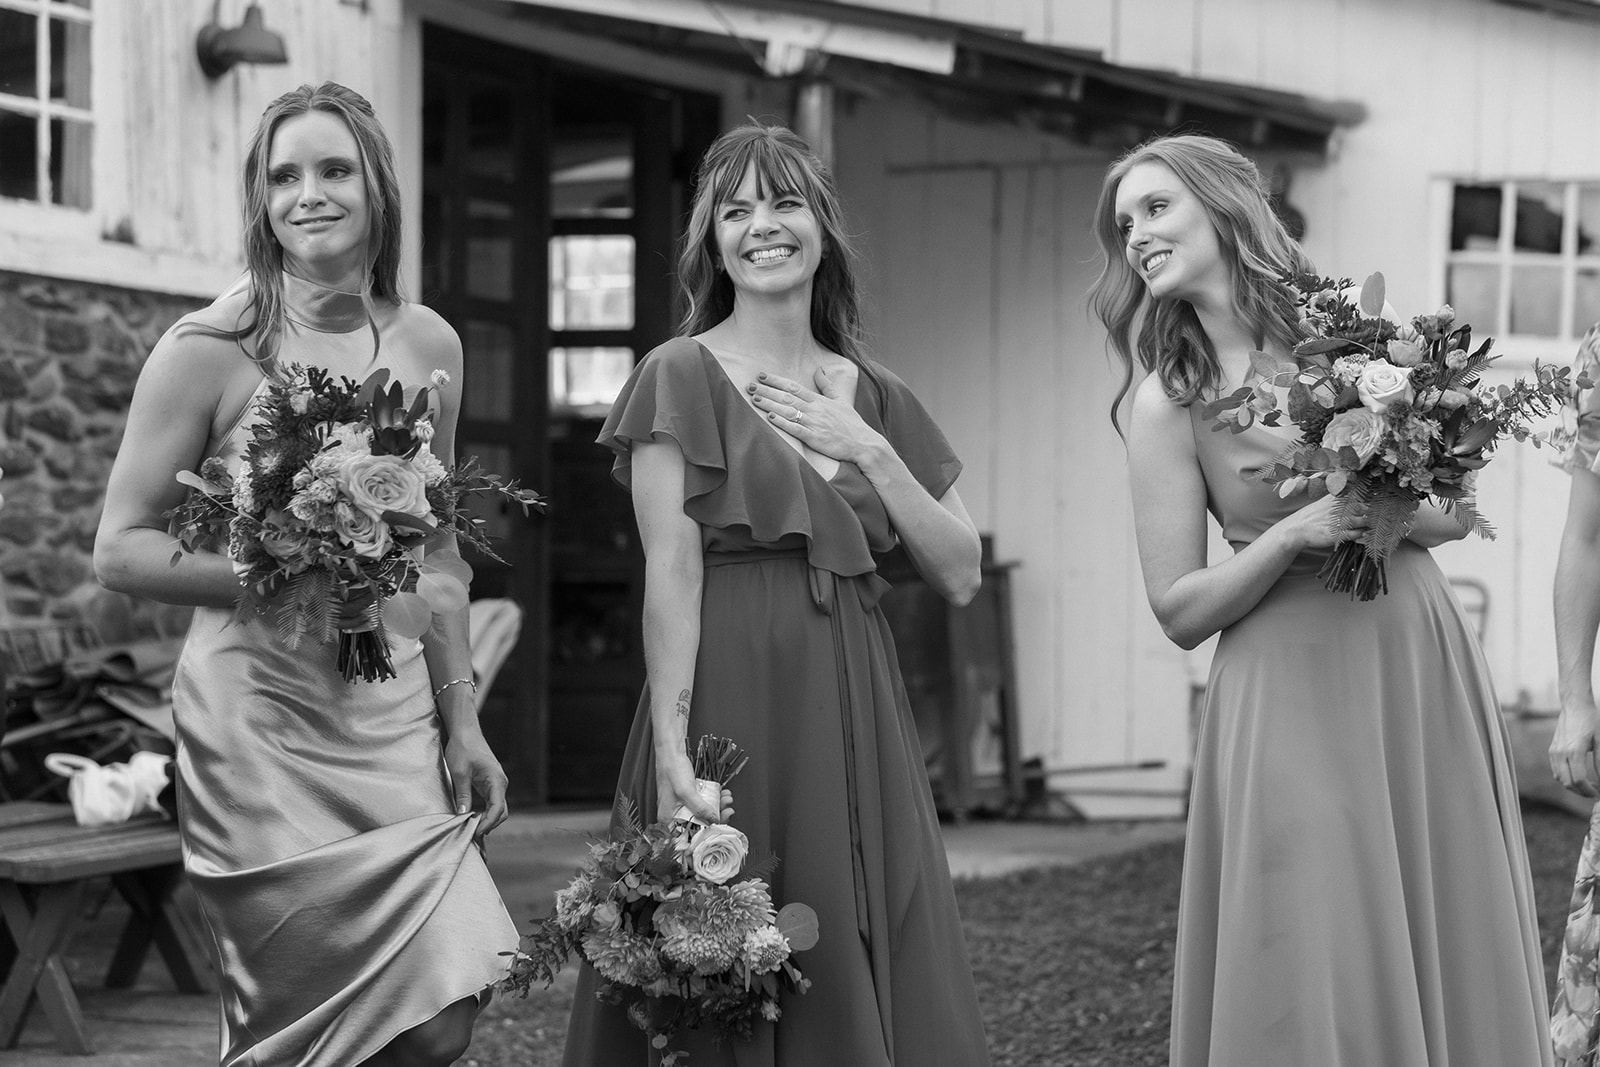 Bridesmaids laugh together holding their bouquets in between portraits